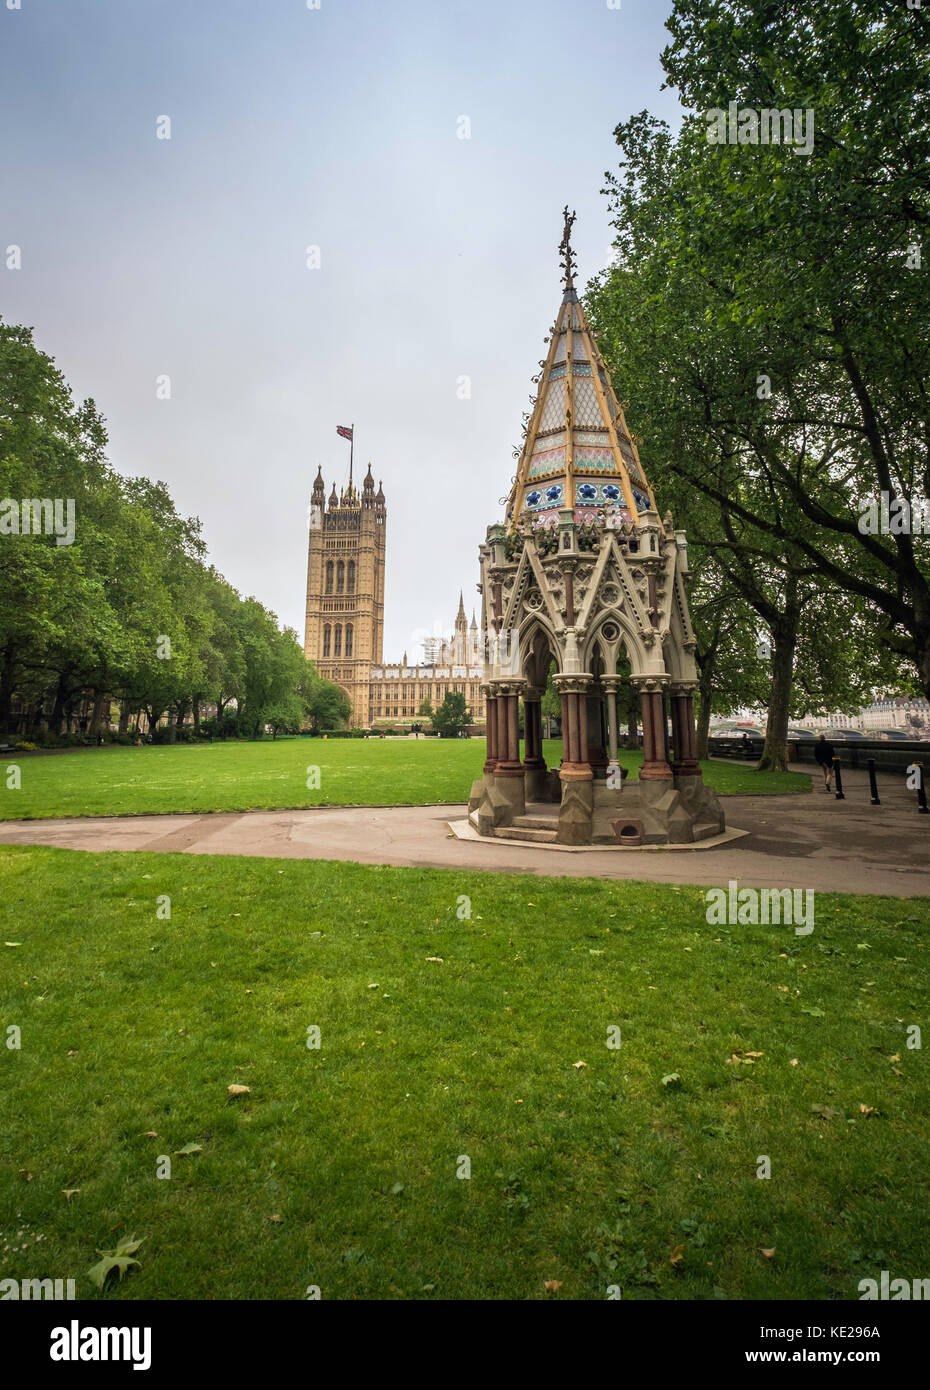 A wide-angle view of Buxton Memorial Fountain and Houses of Parliament   in Victoria Tower Gardens in London. Stock Photo